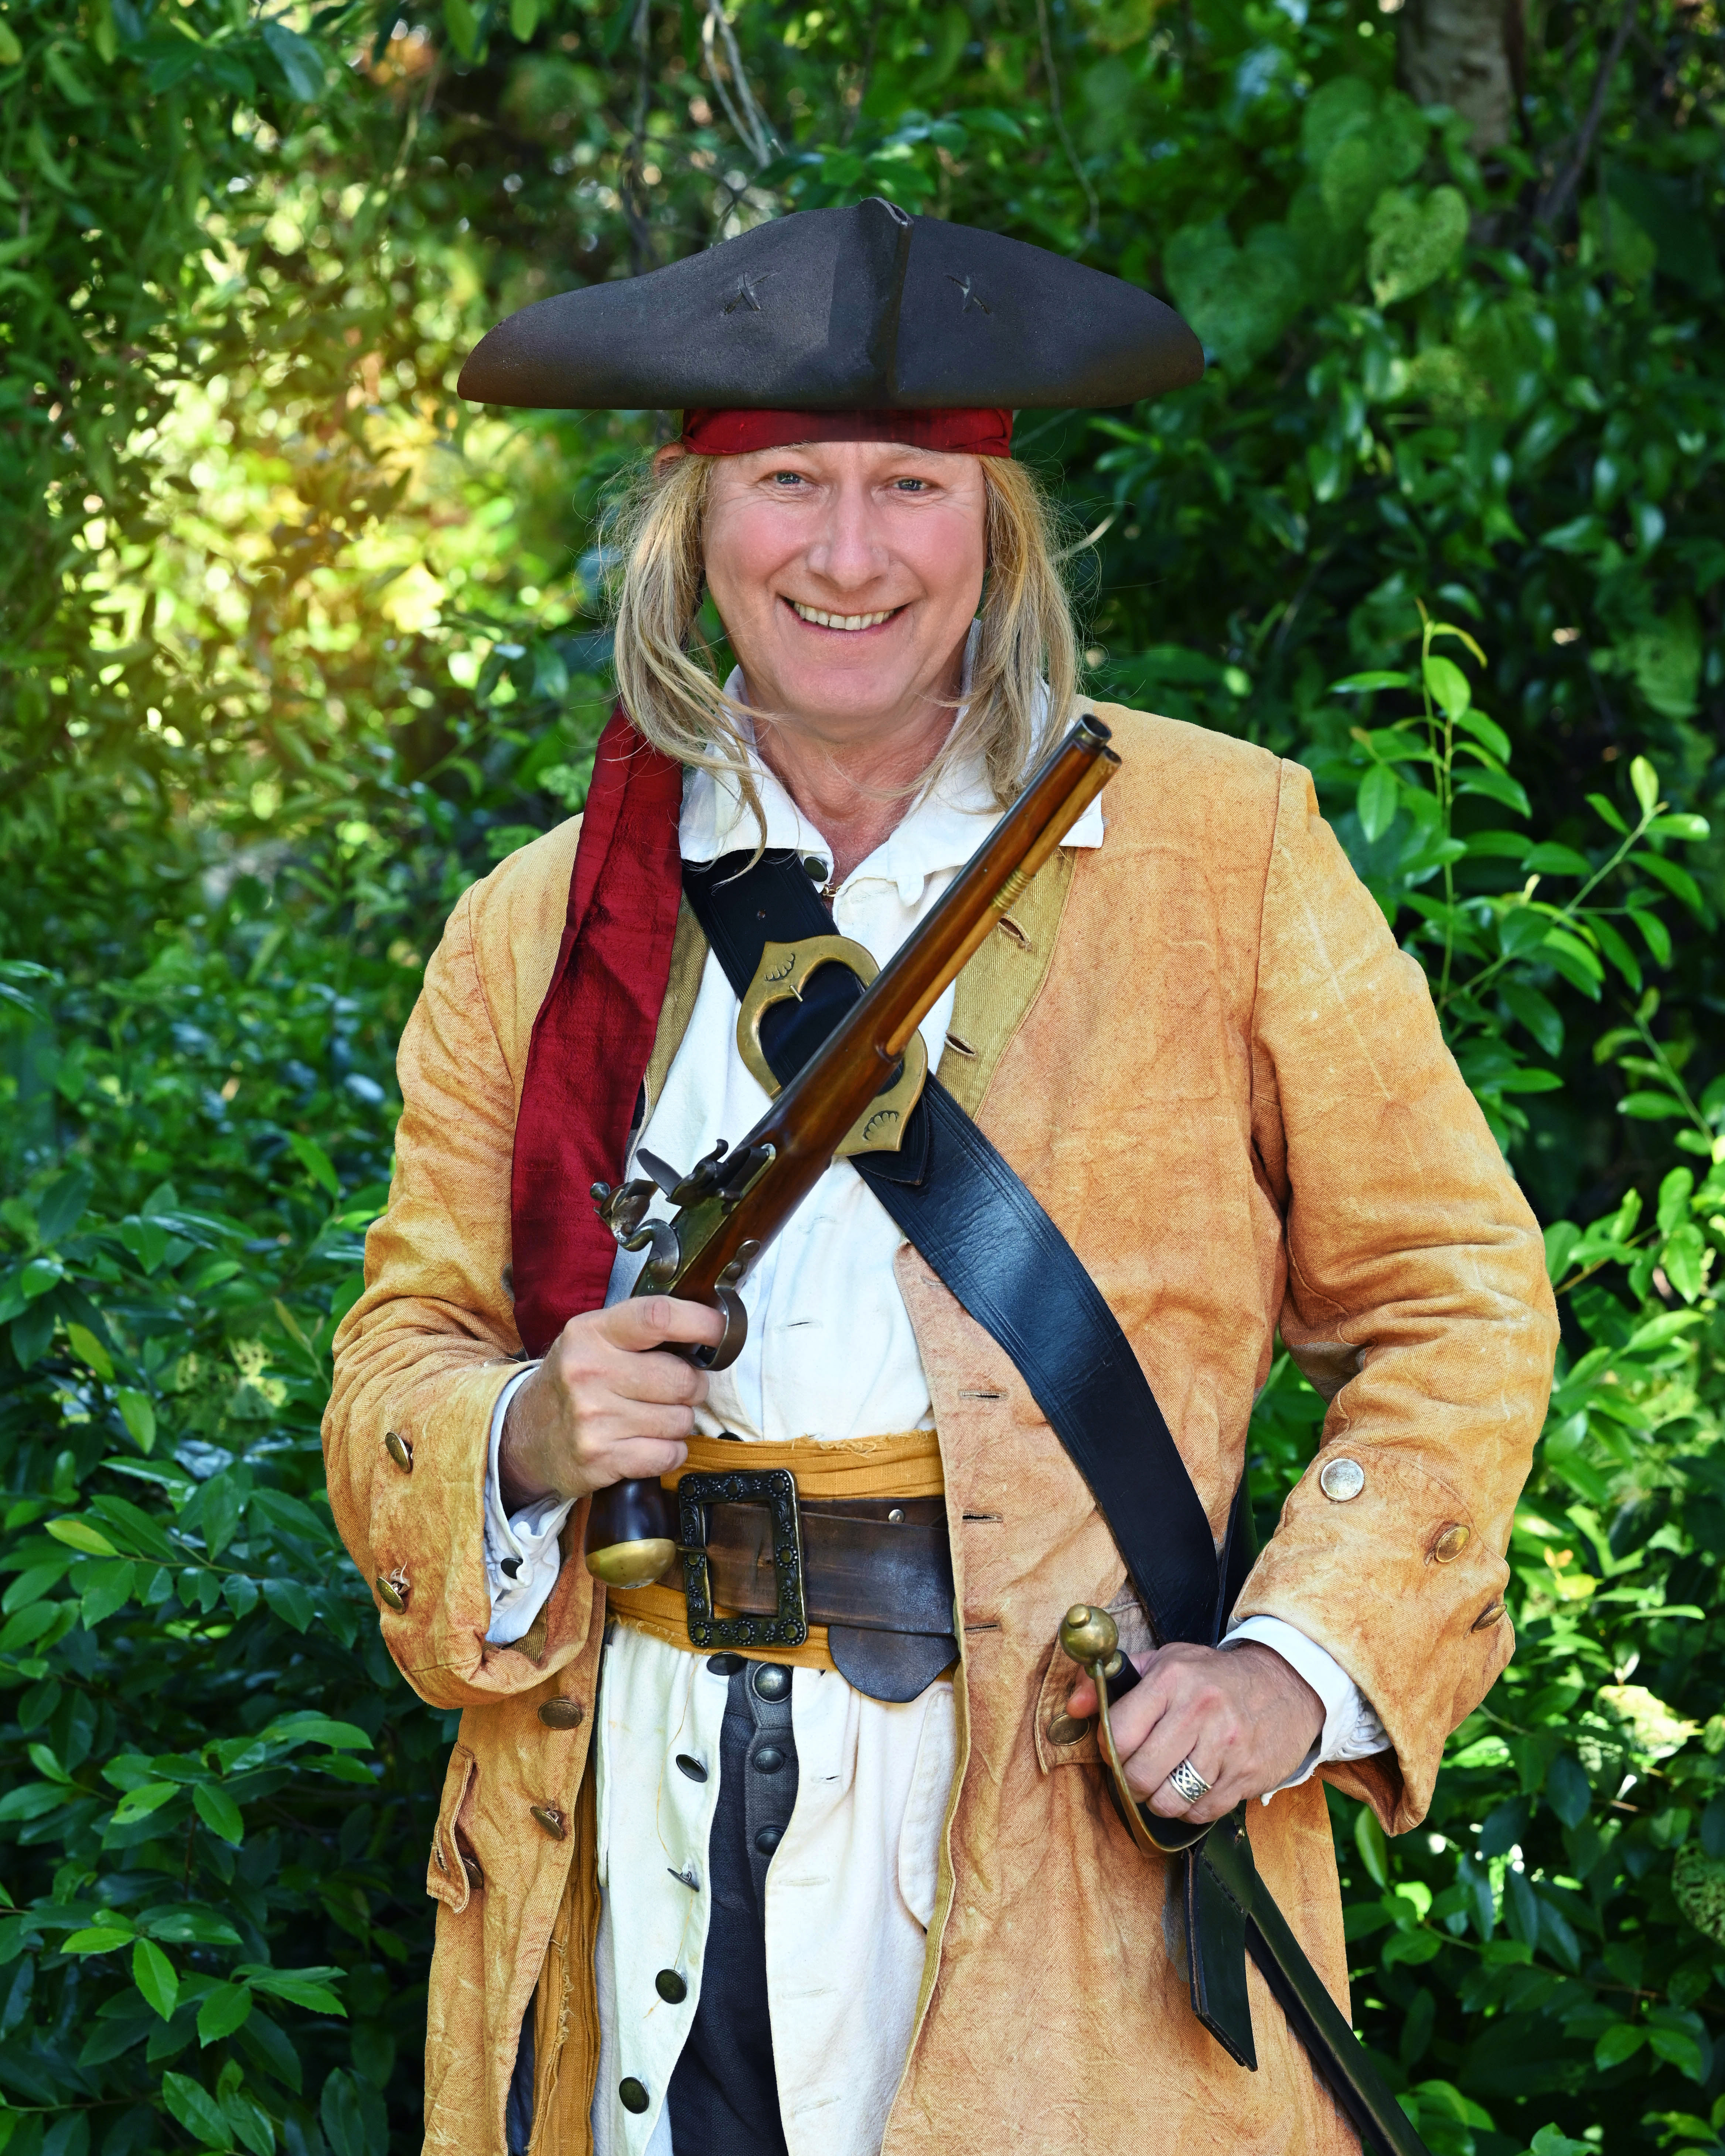 Author Robert Jacob, dressed as a pirate